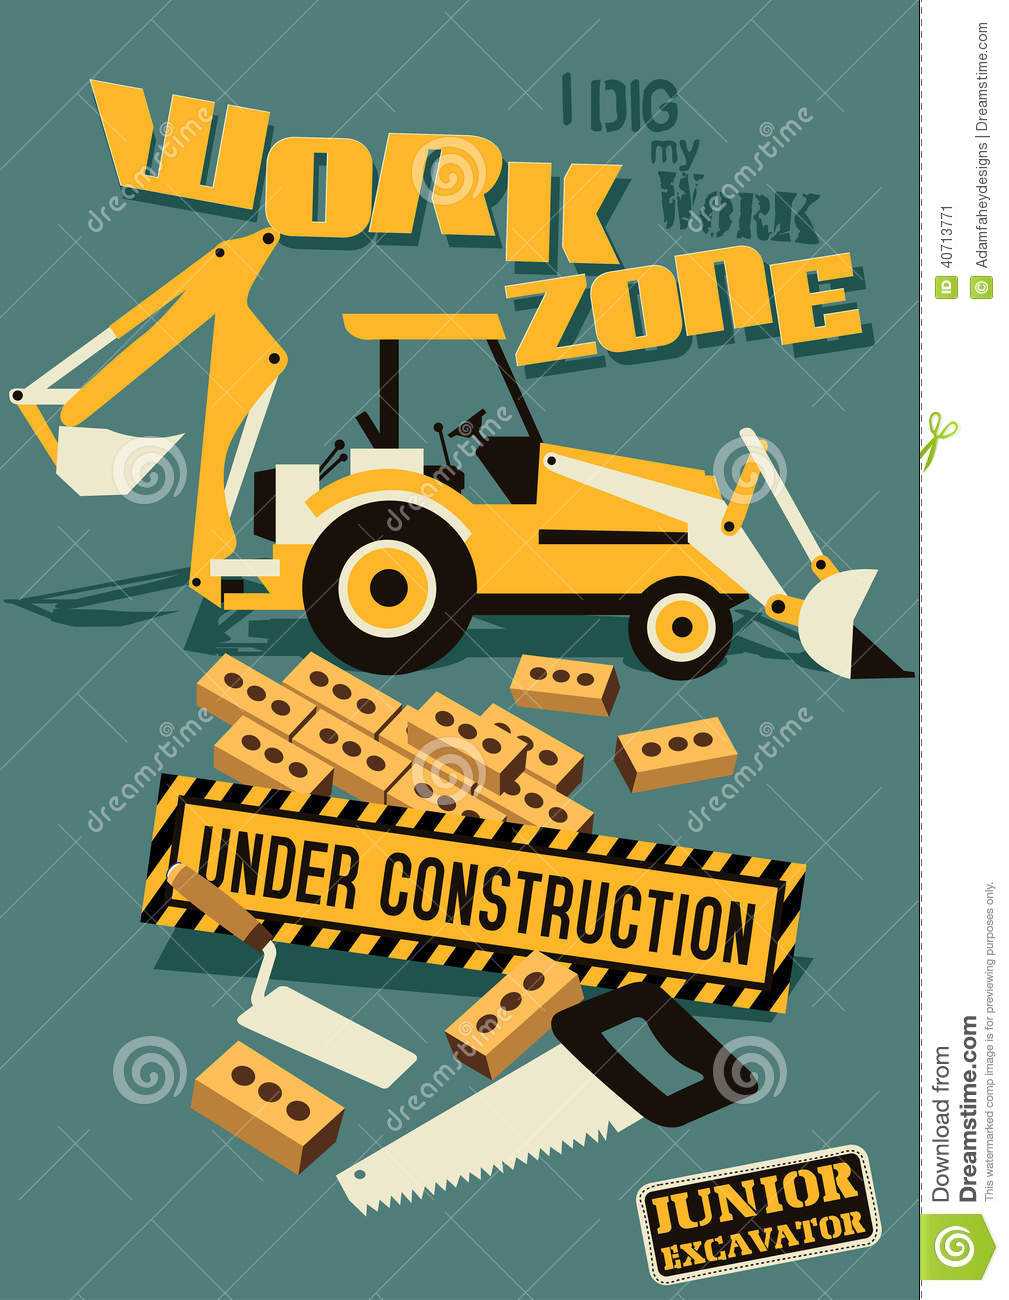 Work Zone Under Construction With Badge Embroidery Stock Vector    